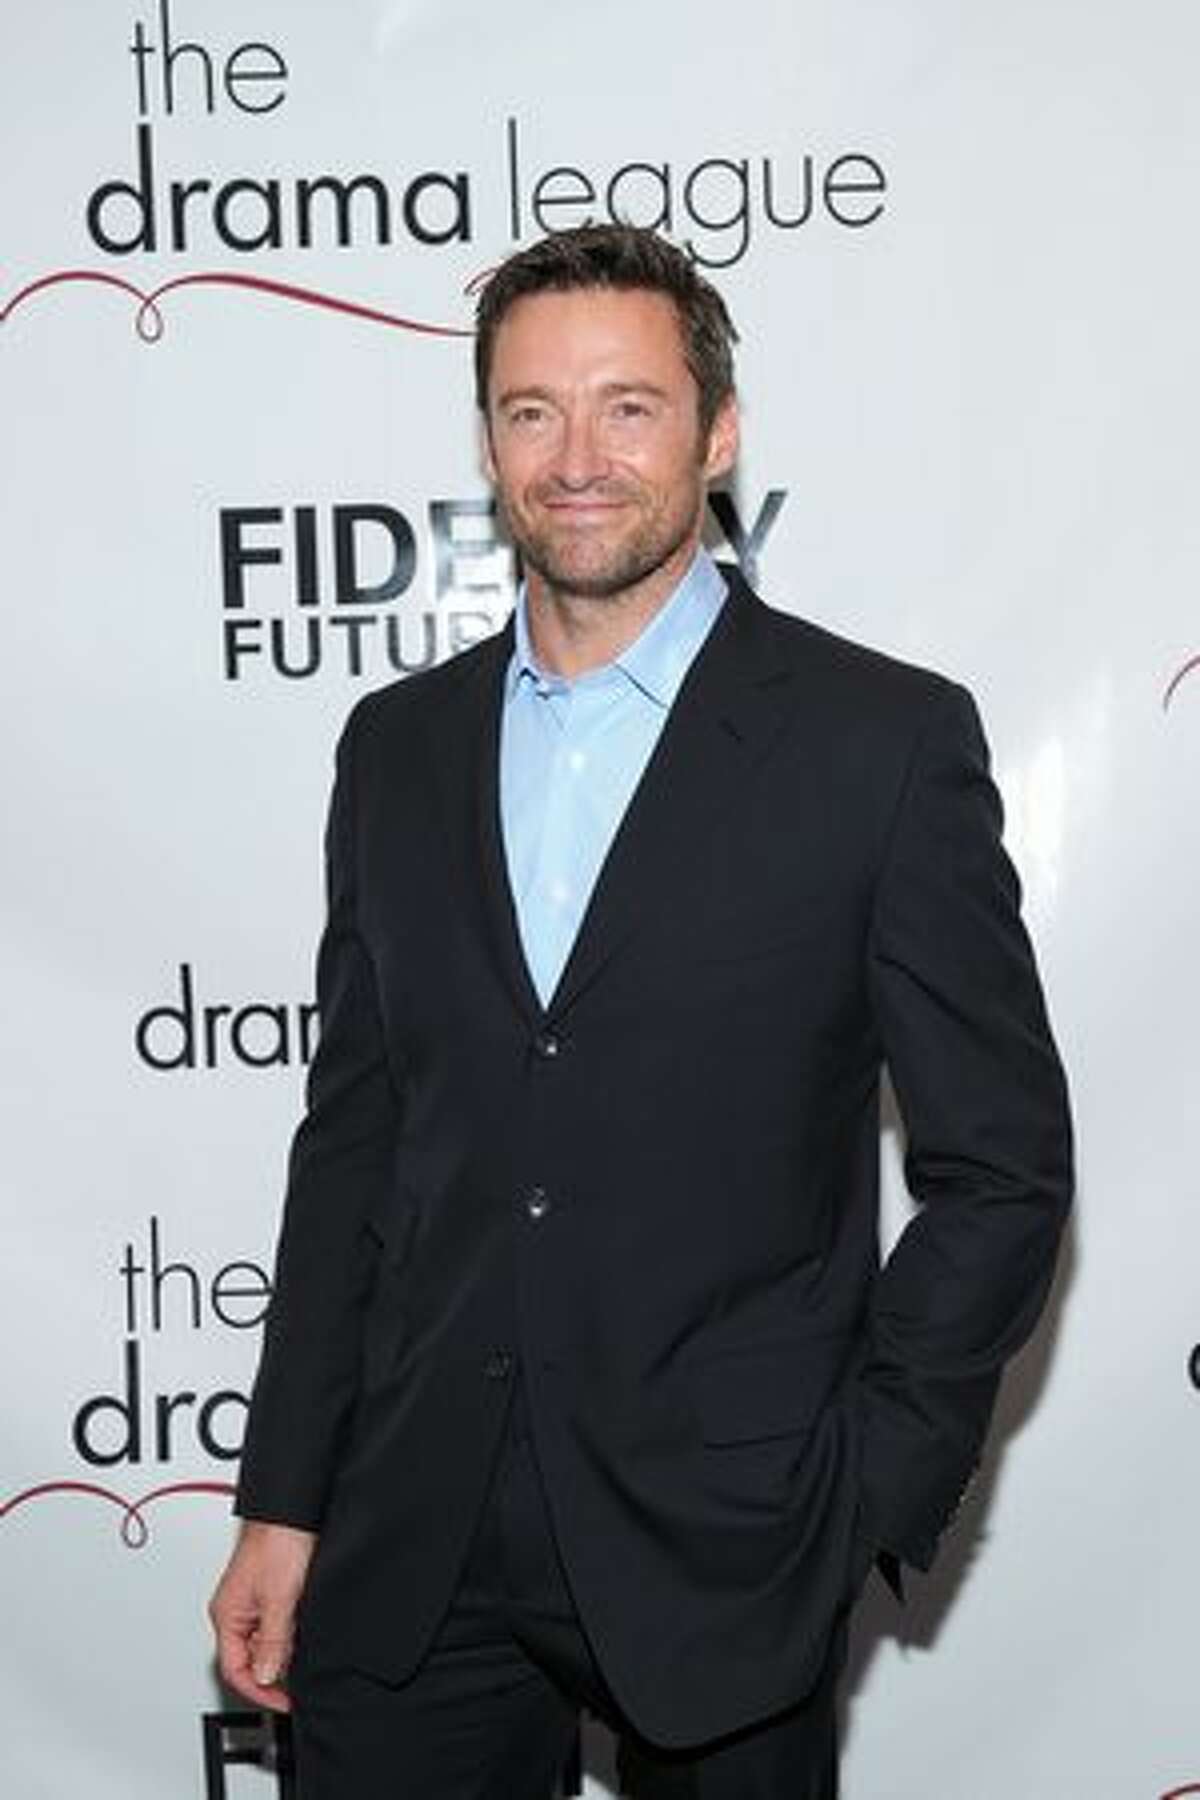 Actor Hugh Jackman attends the 76th Annual Drama League Awards ceremony and luncheon at the Marriot Marquis on May 21, 2010 in New York City.